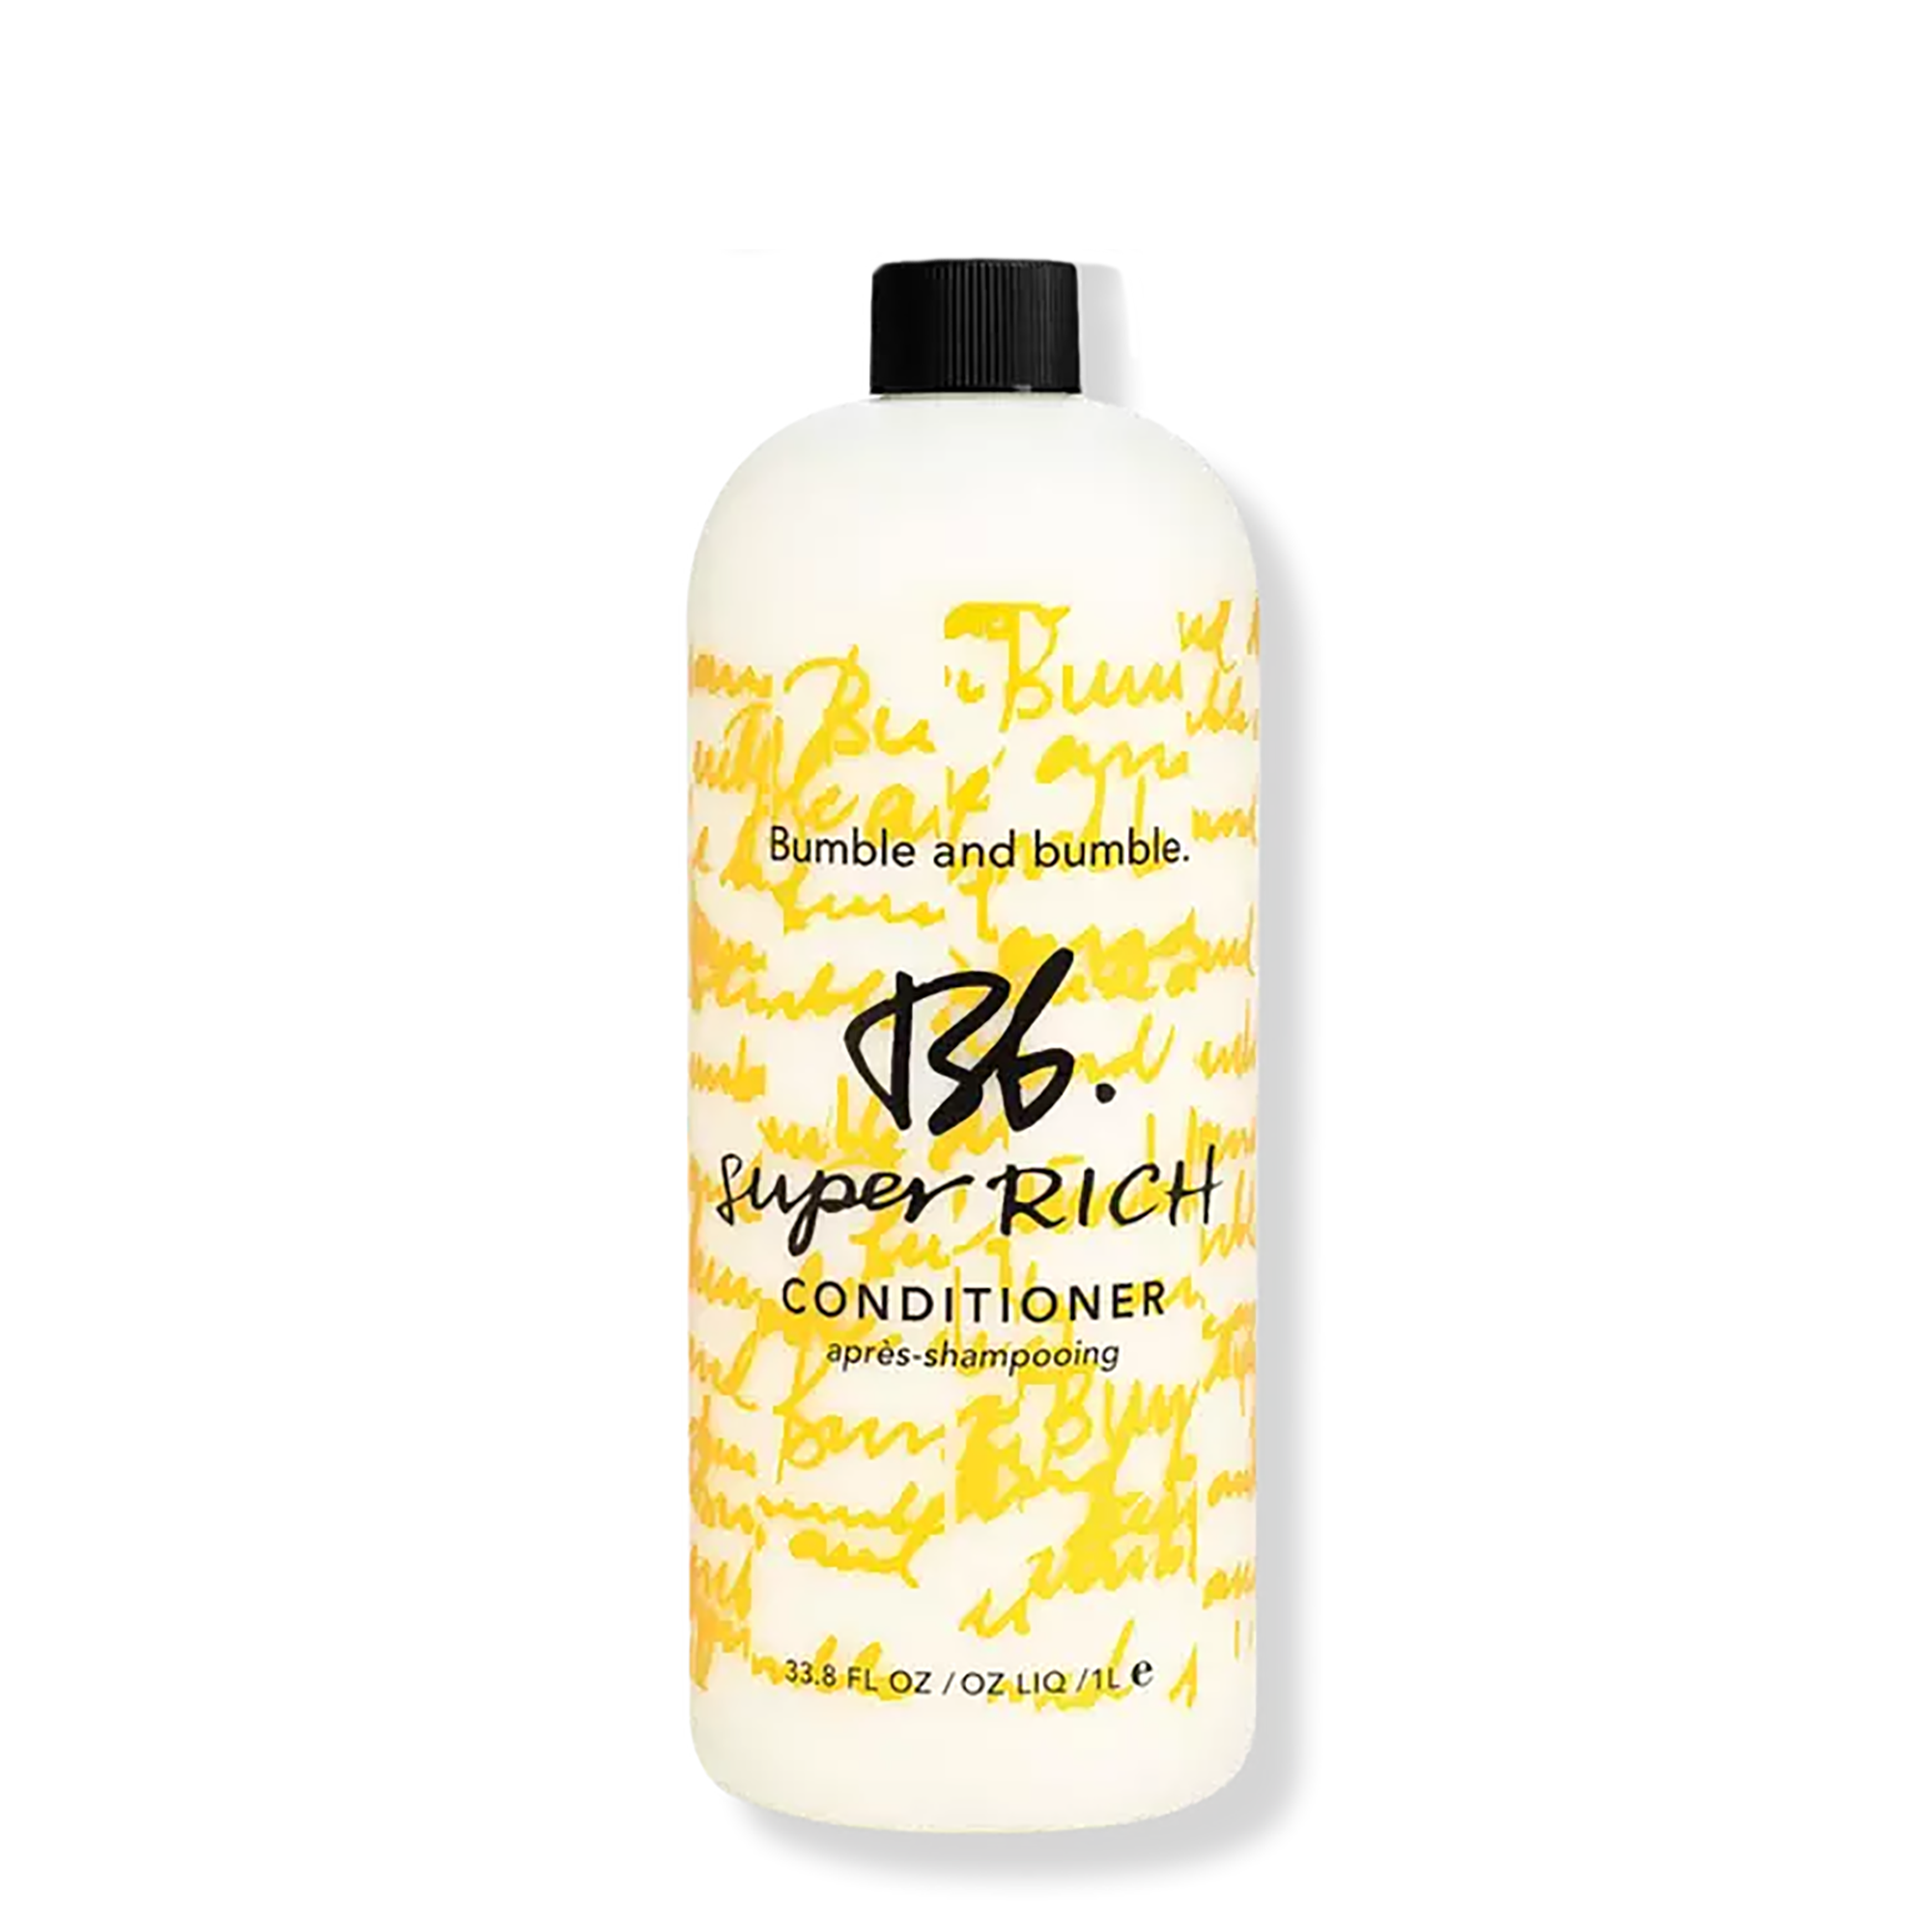 Bumble and bumble Bb.Gentle Shampoo and Bb.Super Rich Conditioner Liter Duo ($187 Value) / LITER